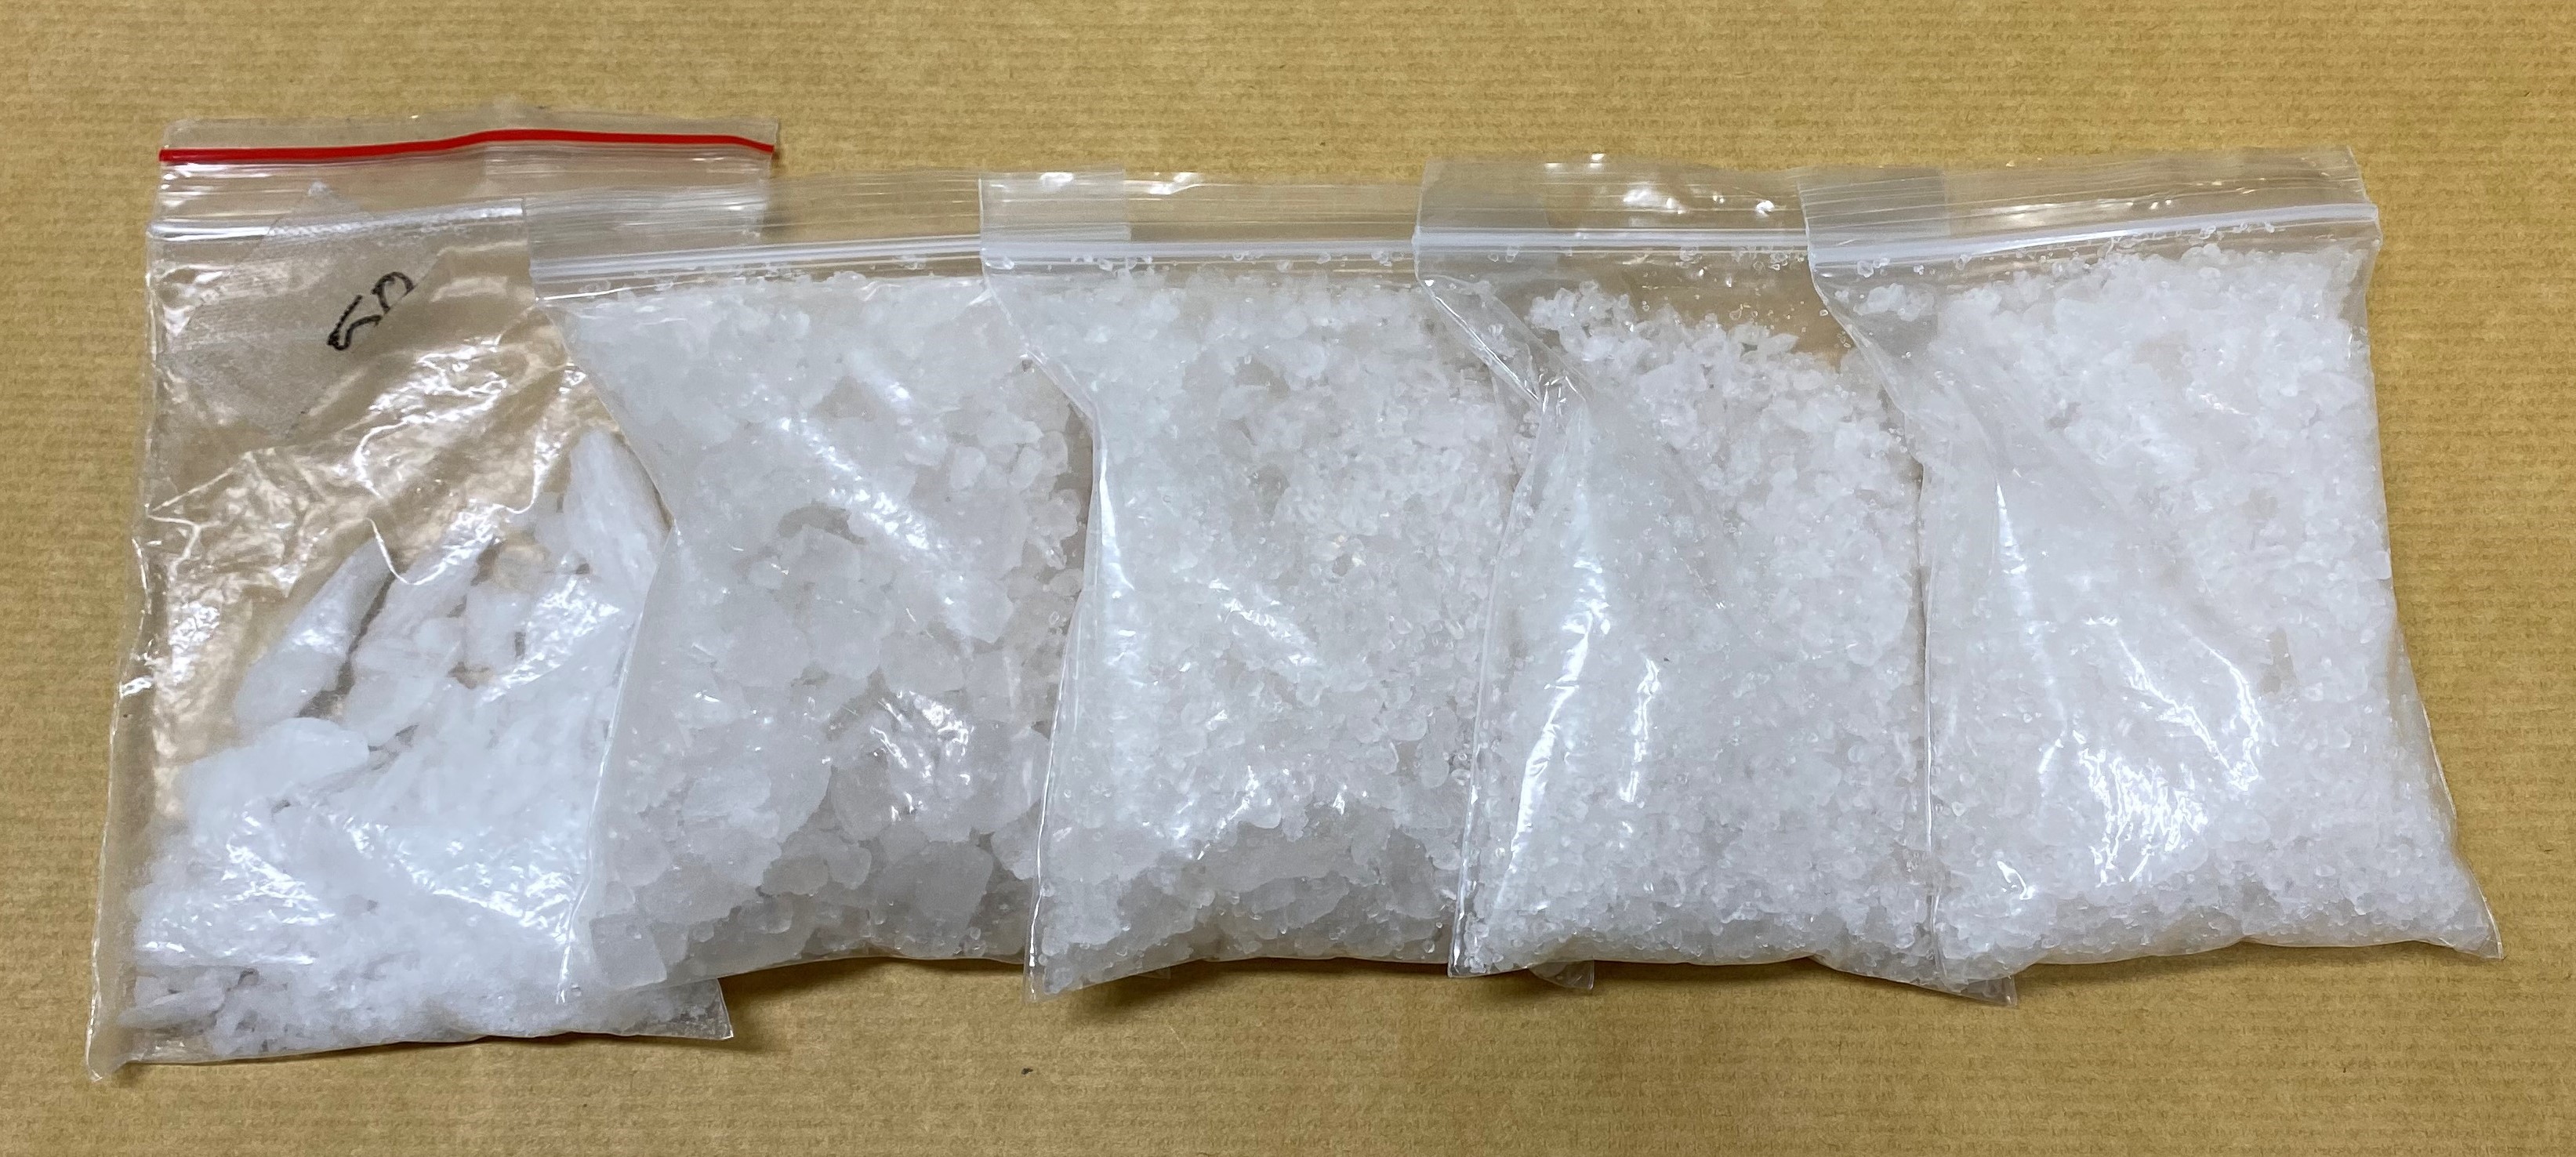 Photo-2 (CNB): ‘Ice’ seized in a case on 21 November 2019.